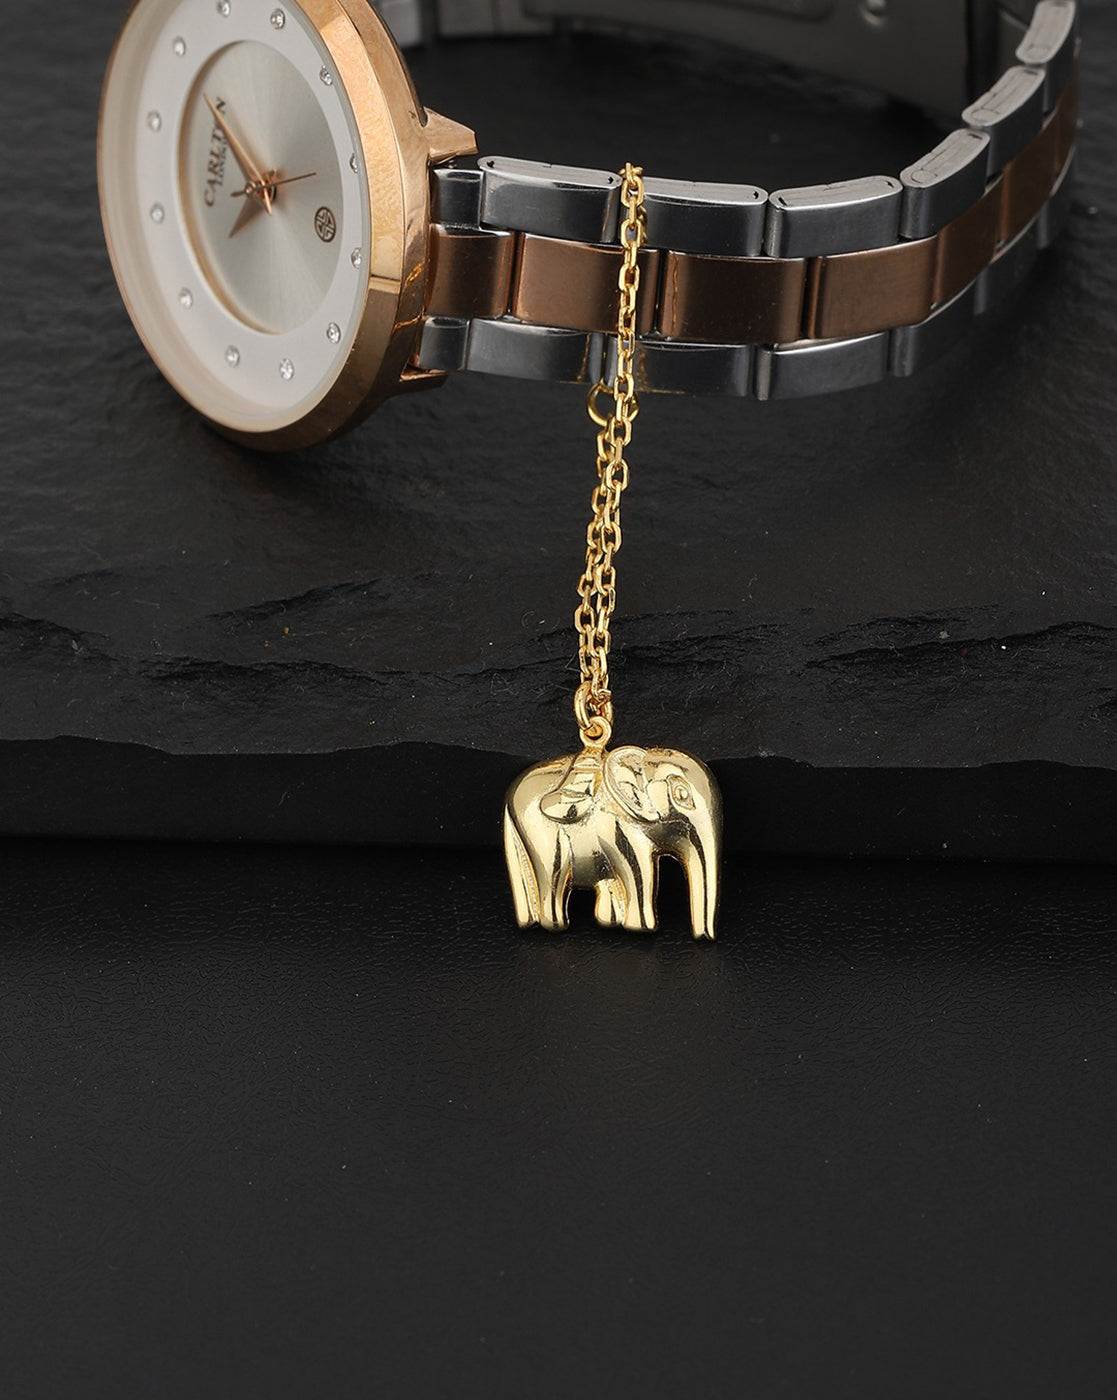 Carlton London Gold Plated Elephant Shape Non-Studded Watch Charm For Women